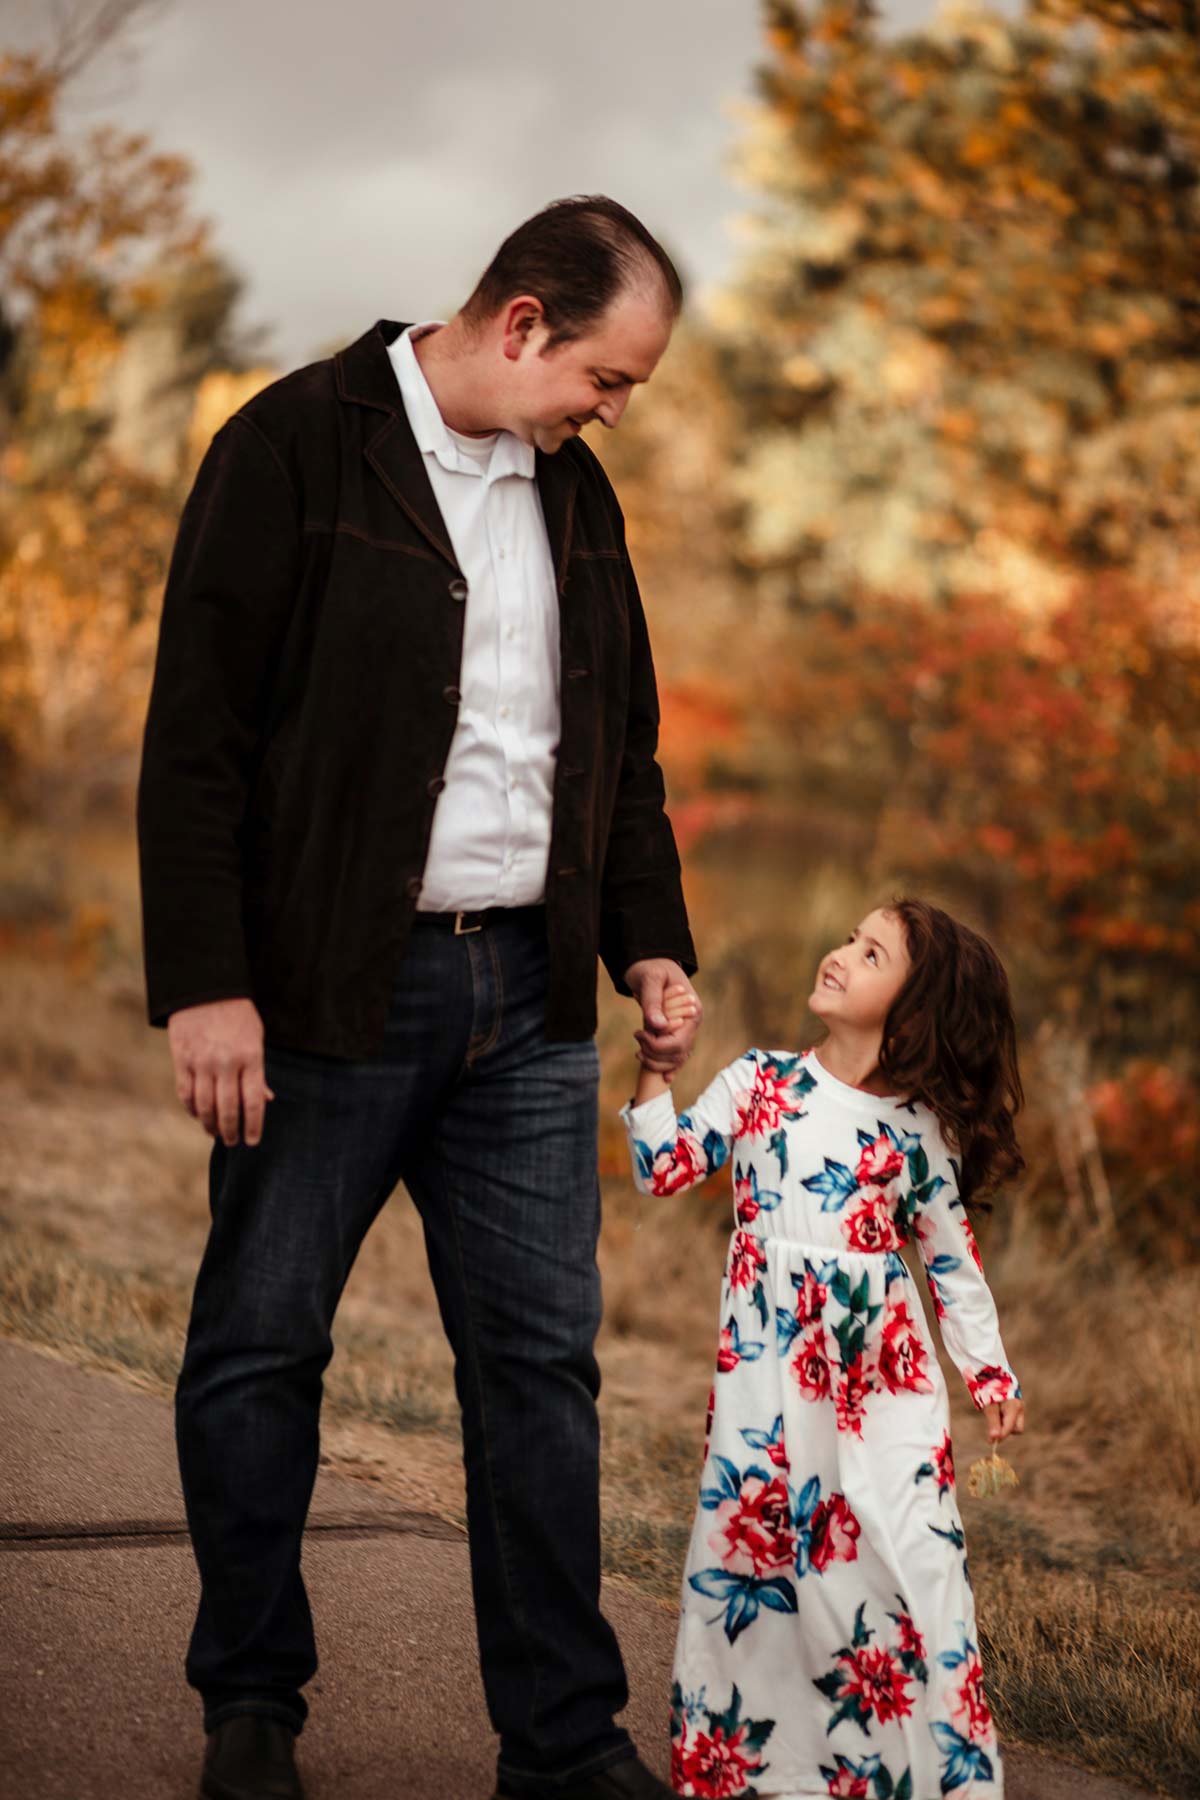 Professional family pictures taken in Denver, Colorado